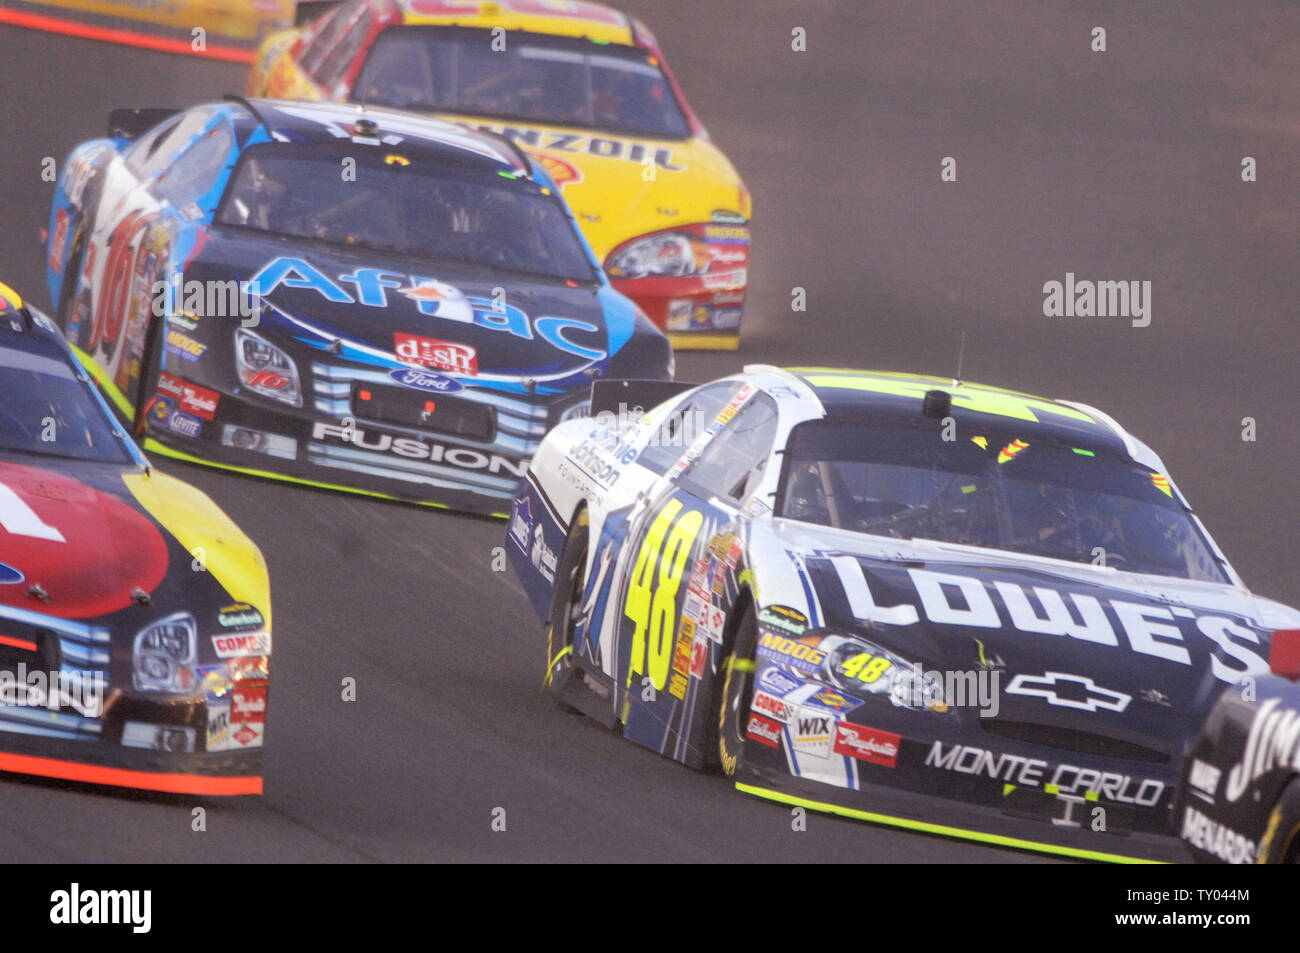 Driver Jimmie Johnson R Drives Car Number 48 On His Way To Winning The Nascar Sharp Aquos 500 At California Speedway In Fontana California On September 2 2007 Upi Photo Phil Mccarten Stock Photo Alamy